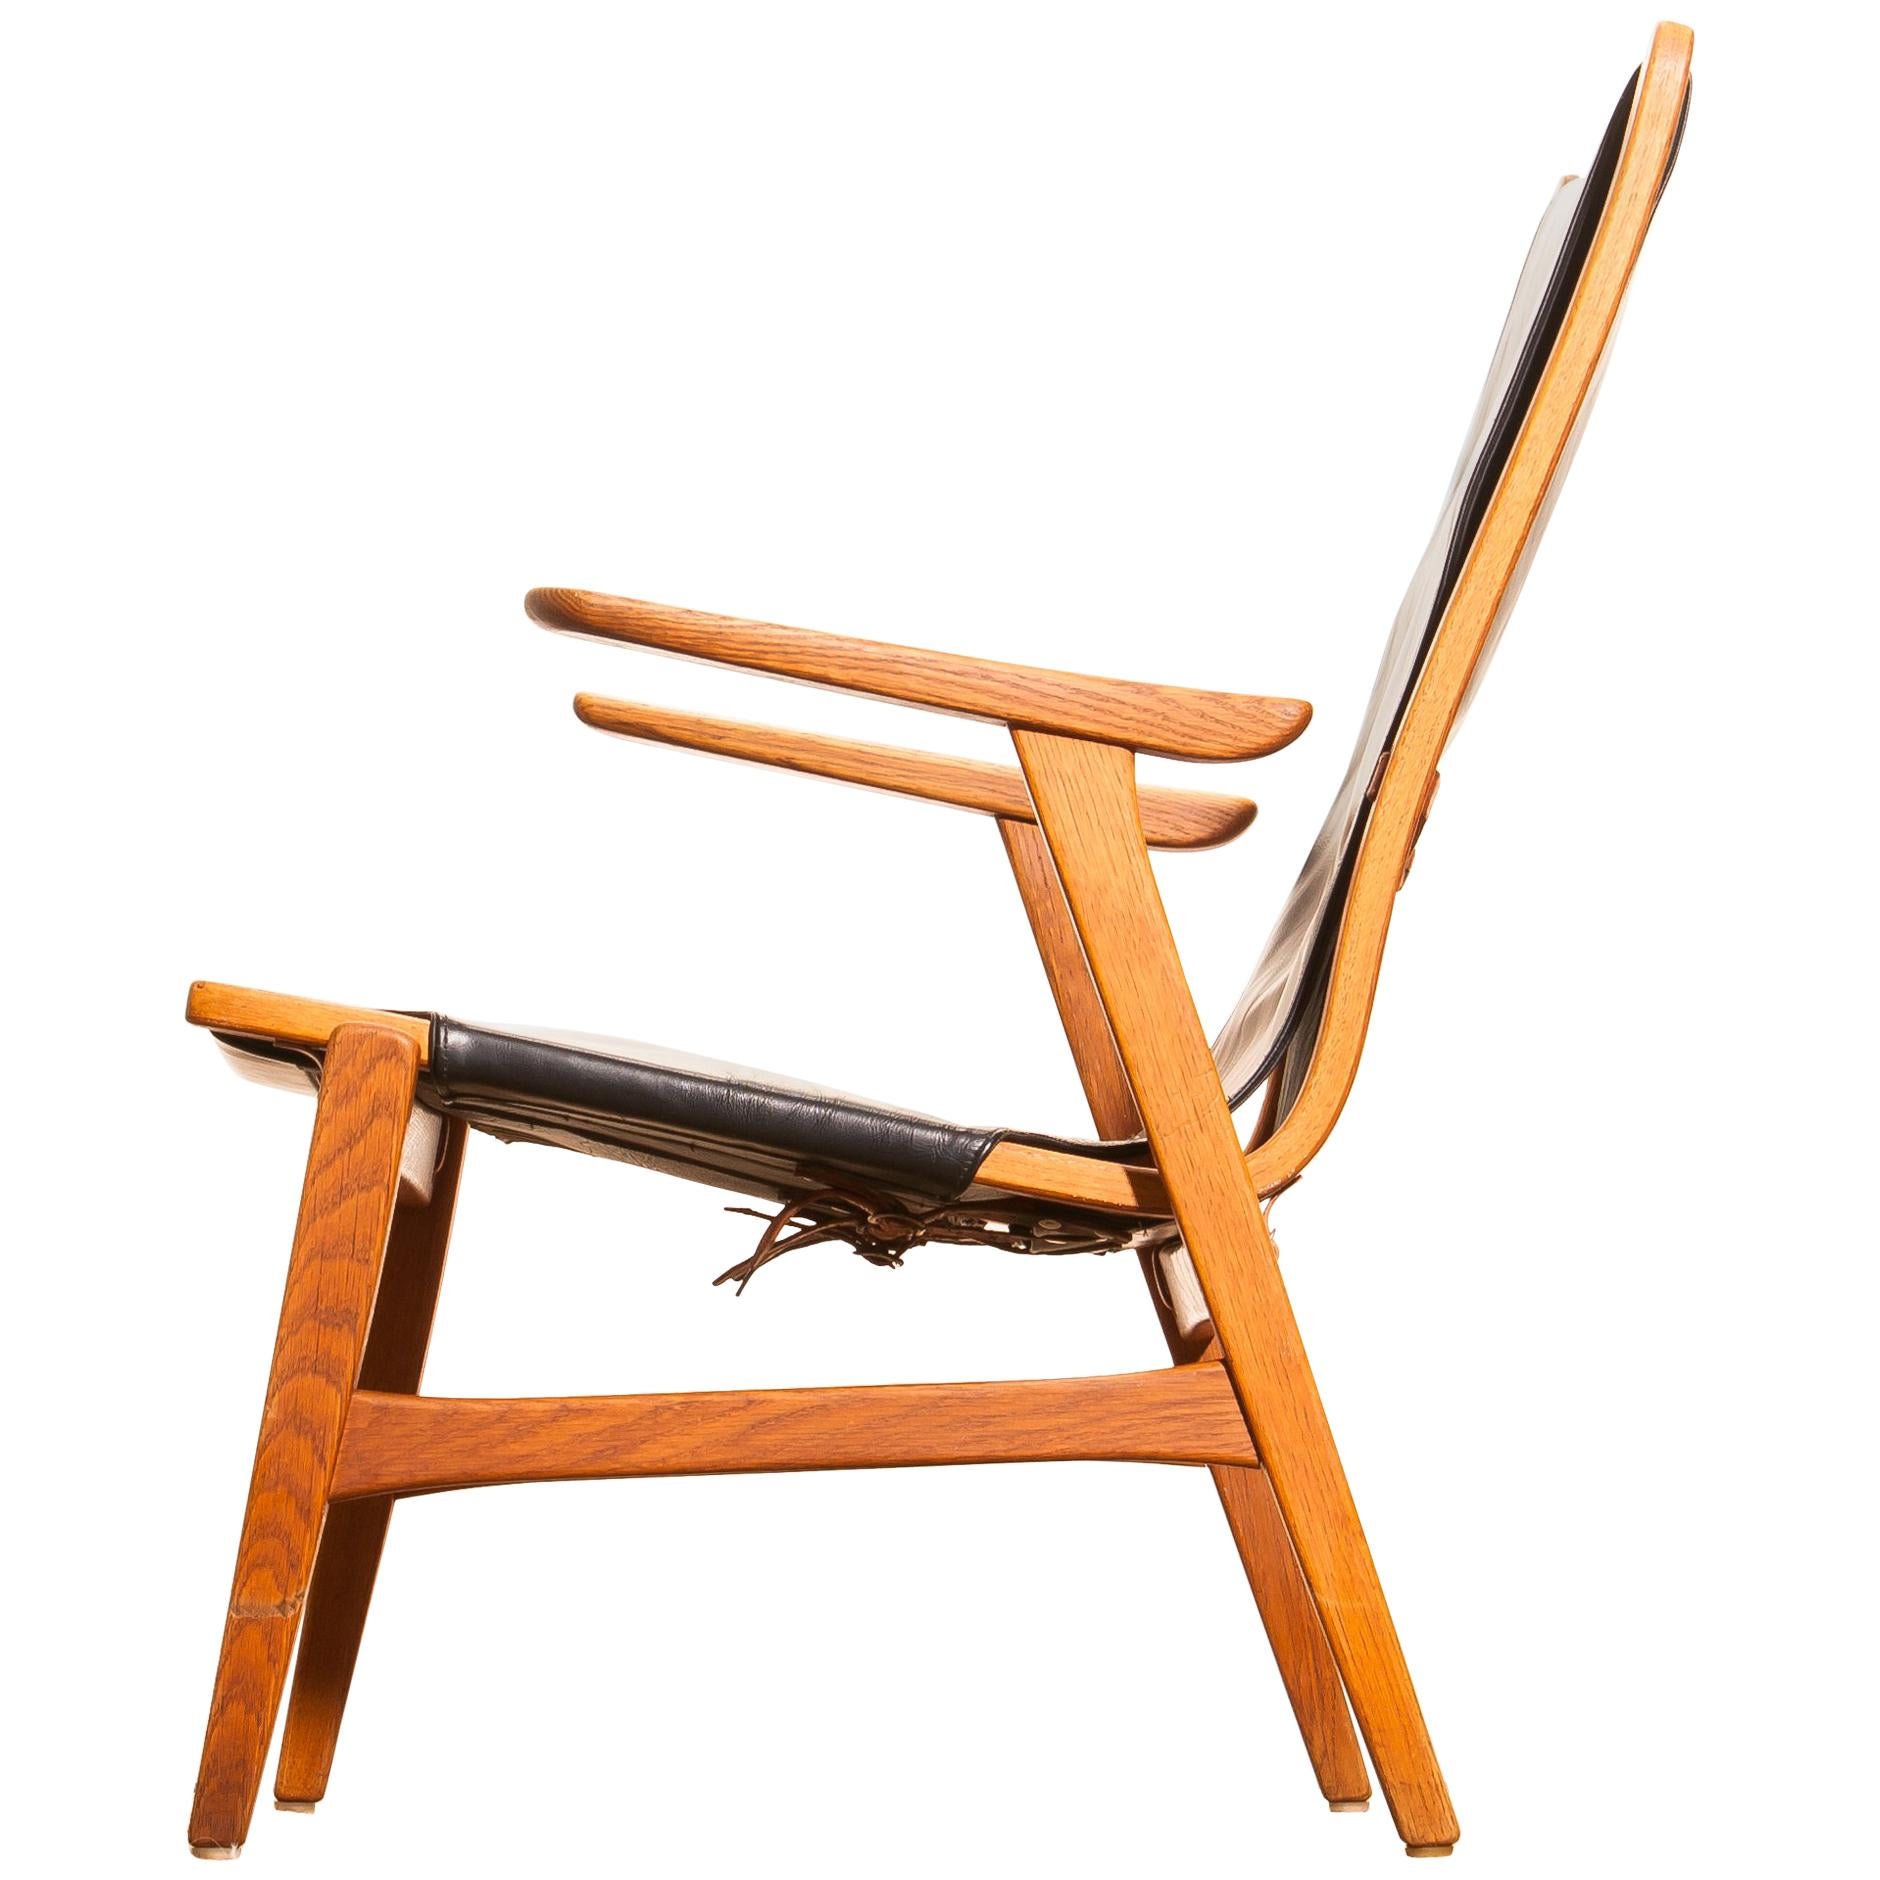 1950s, Oak and Leatherette Hunting Chair 'Ulrika' by Östen Kristiansson 1